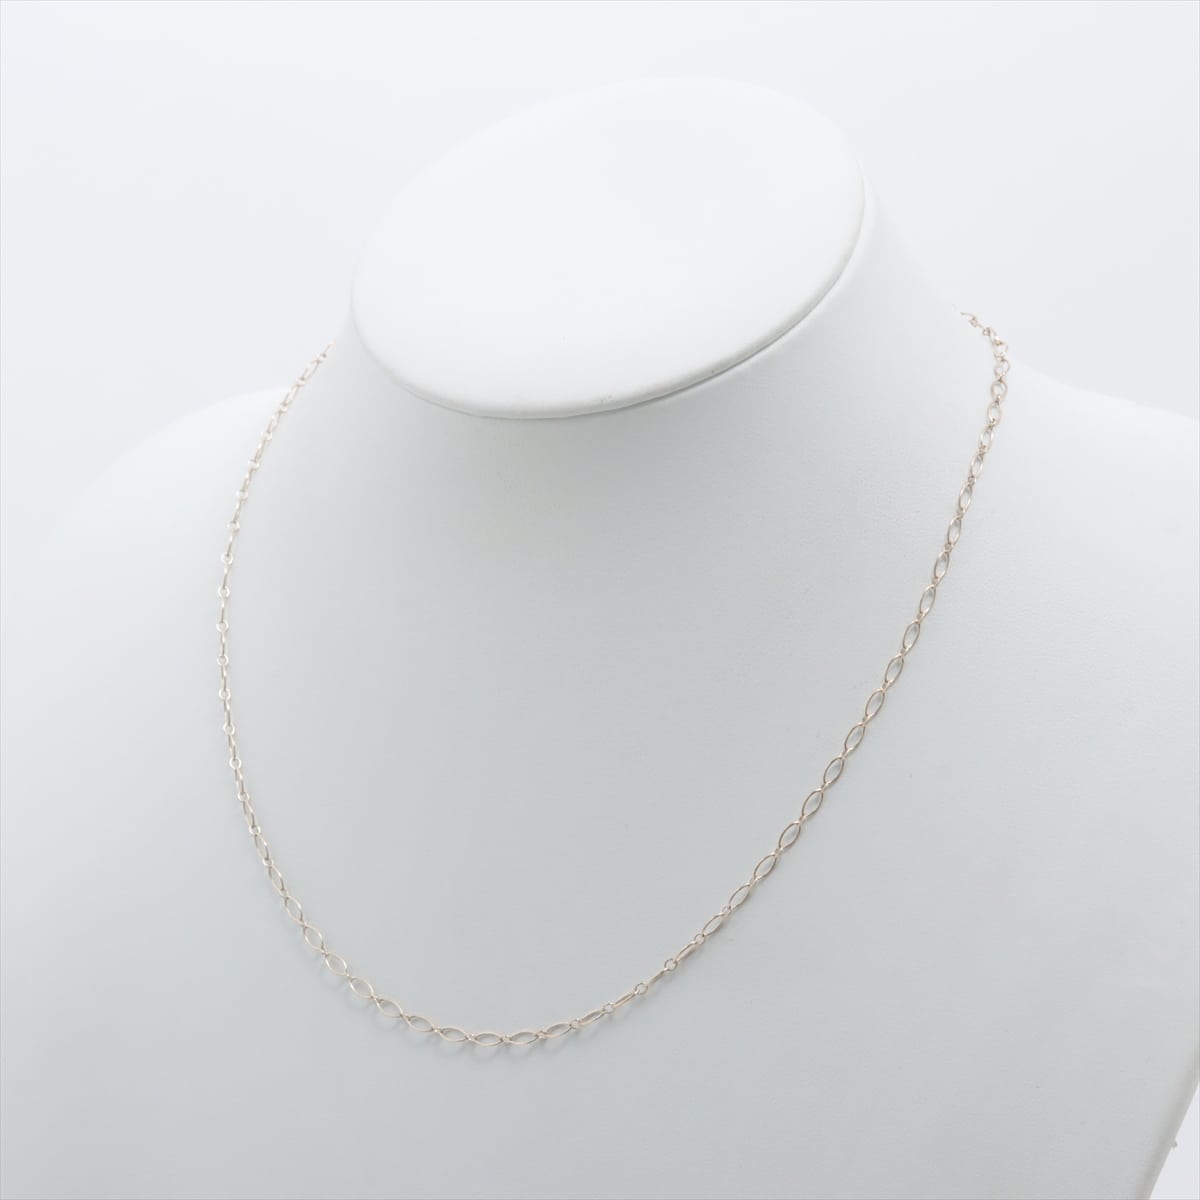 Tiffany Oval link Necklace 925 1.9g Silver